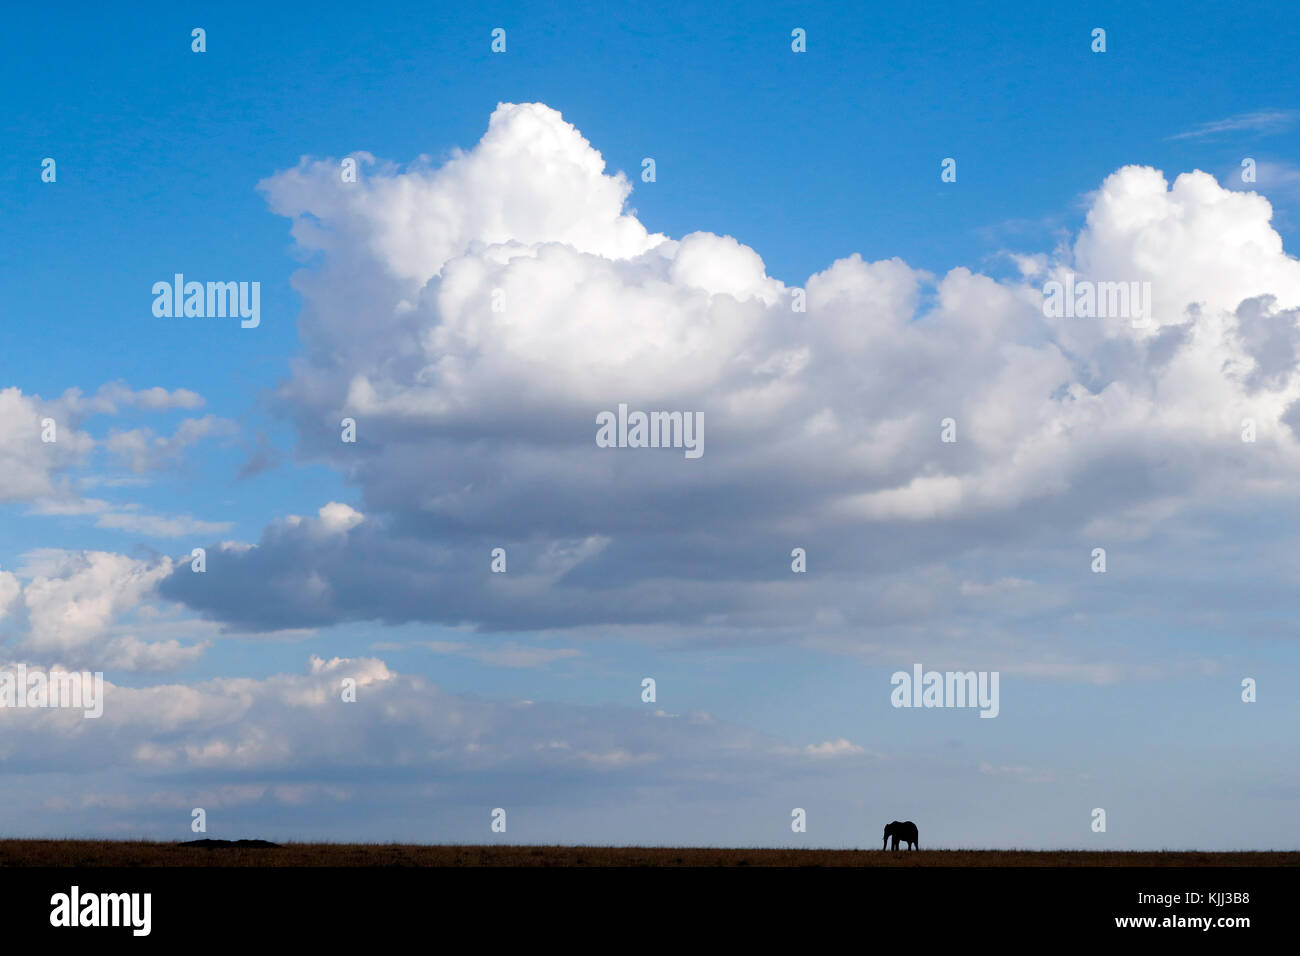 African Elephant (Loxodonta africana). Silhouette against blue sky with clouds. Masai Mara game reserve. Kenya. Stock Photo